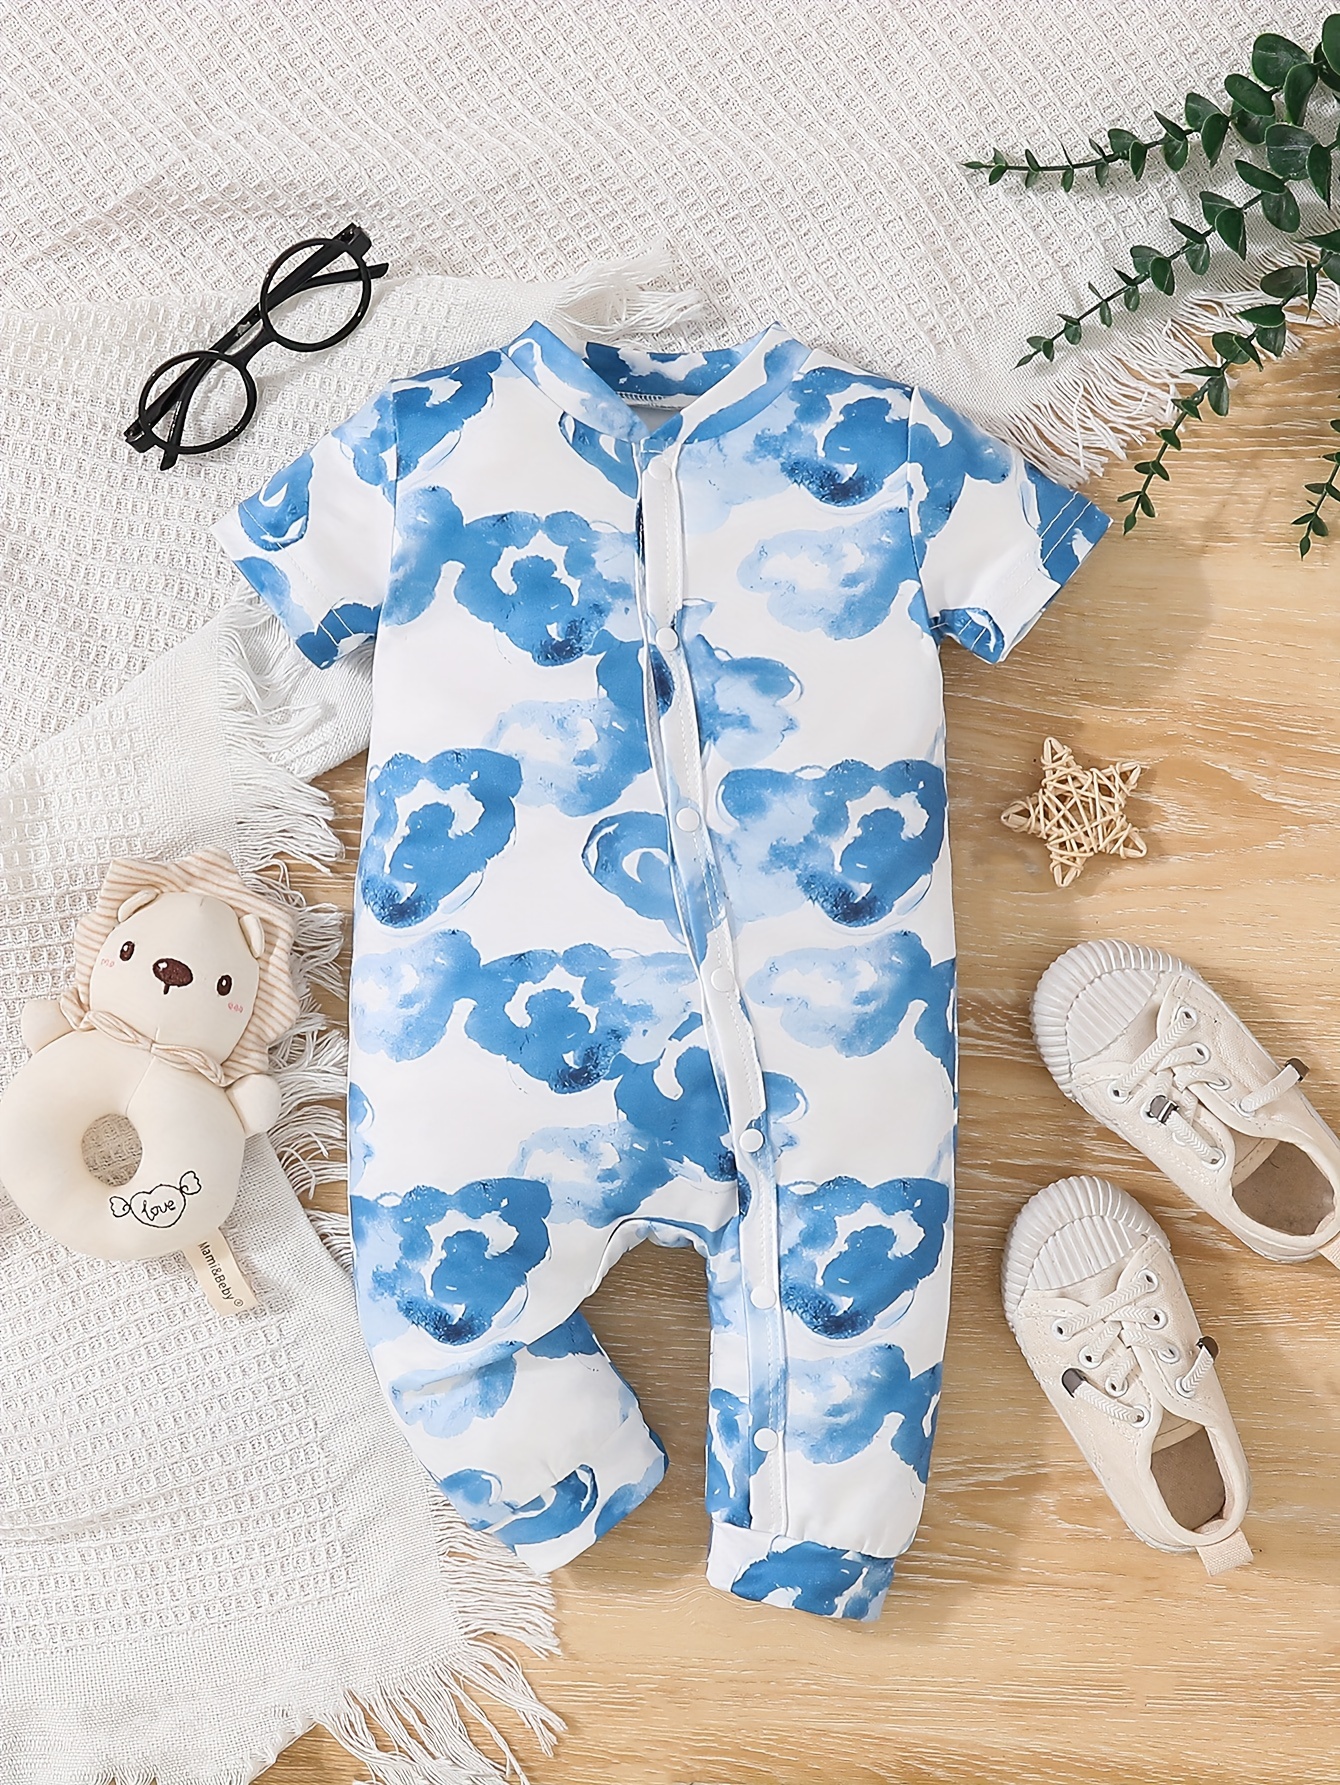 100% Cotton Baby Boy Gentleman Party Outfit Bow Tie Decor Button Front Long-sleeve Jumpsuit